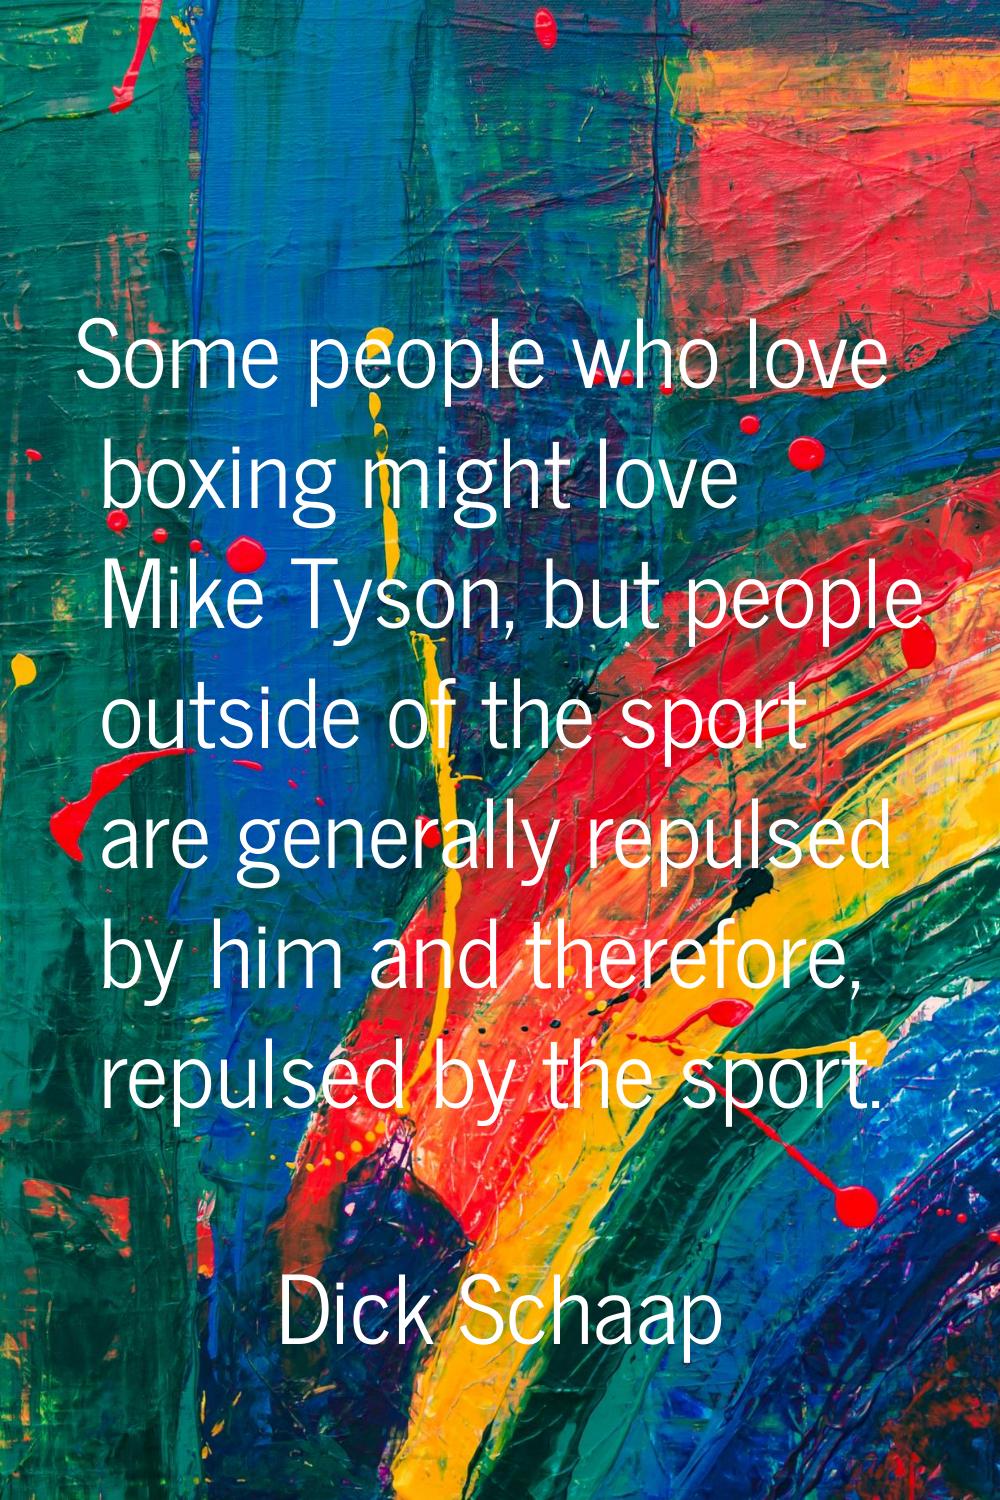 Some people who love boxing might love Mike Tyson, but people outside of the sport are generally re